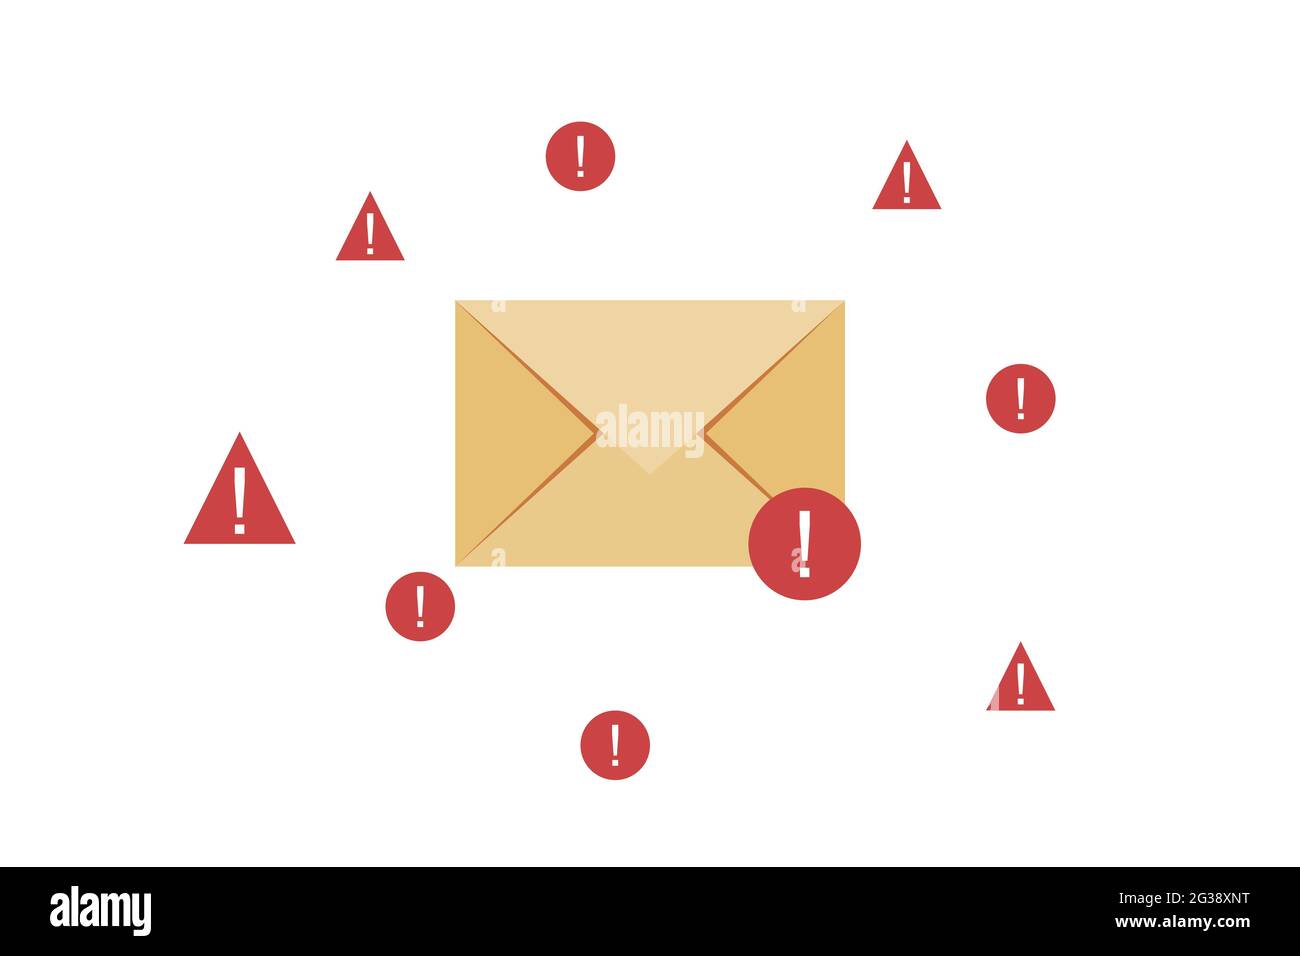 Dangerous messages illustration. Receiving spam emails. Unsolicited email concept. An envelope surrounded by warning signs. Vector. Stock Vector